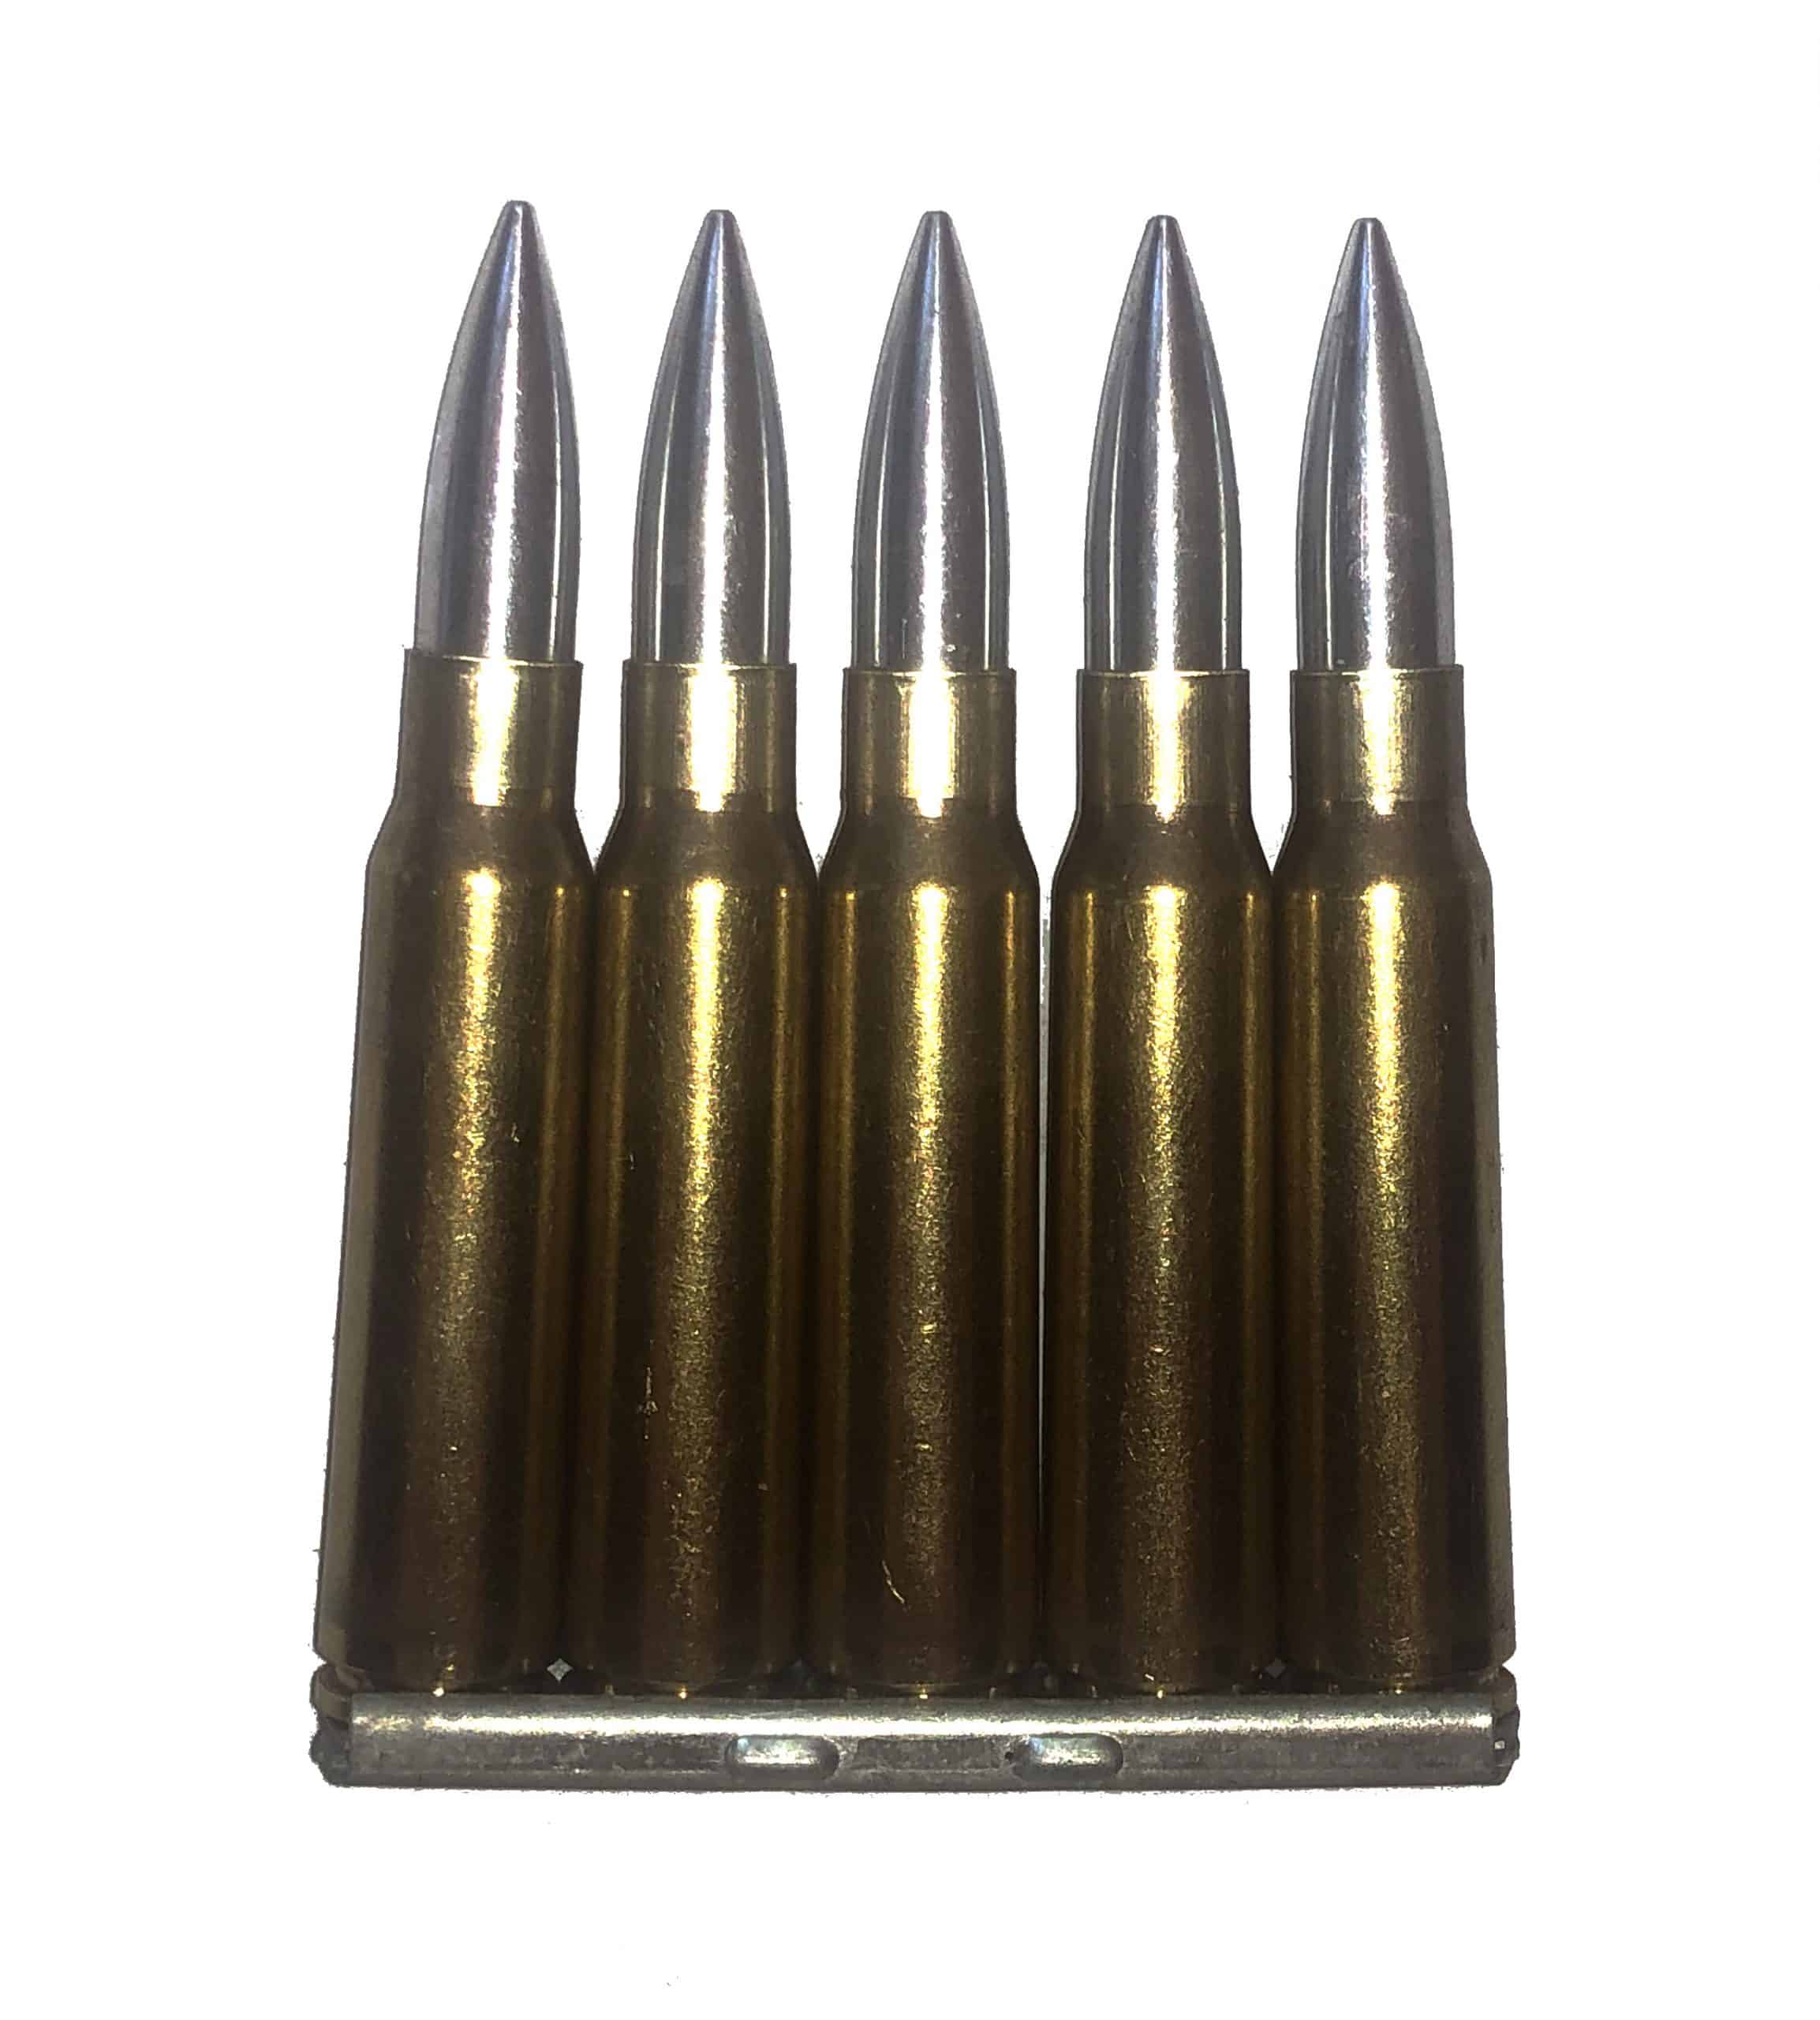 7.5x54 French in MAS Stripper Clip Cupronickel Dummy Rounds